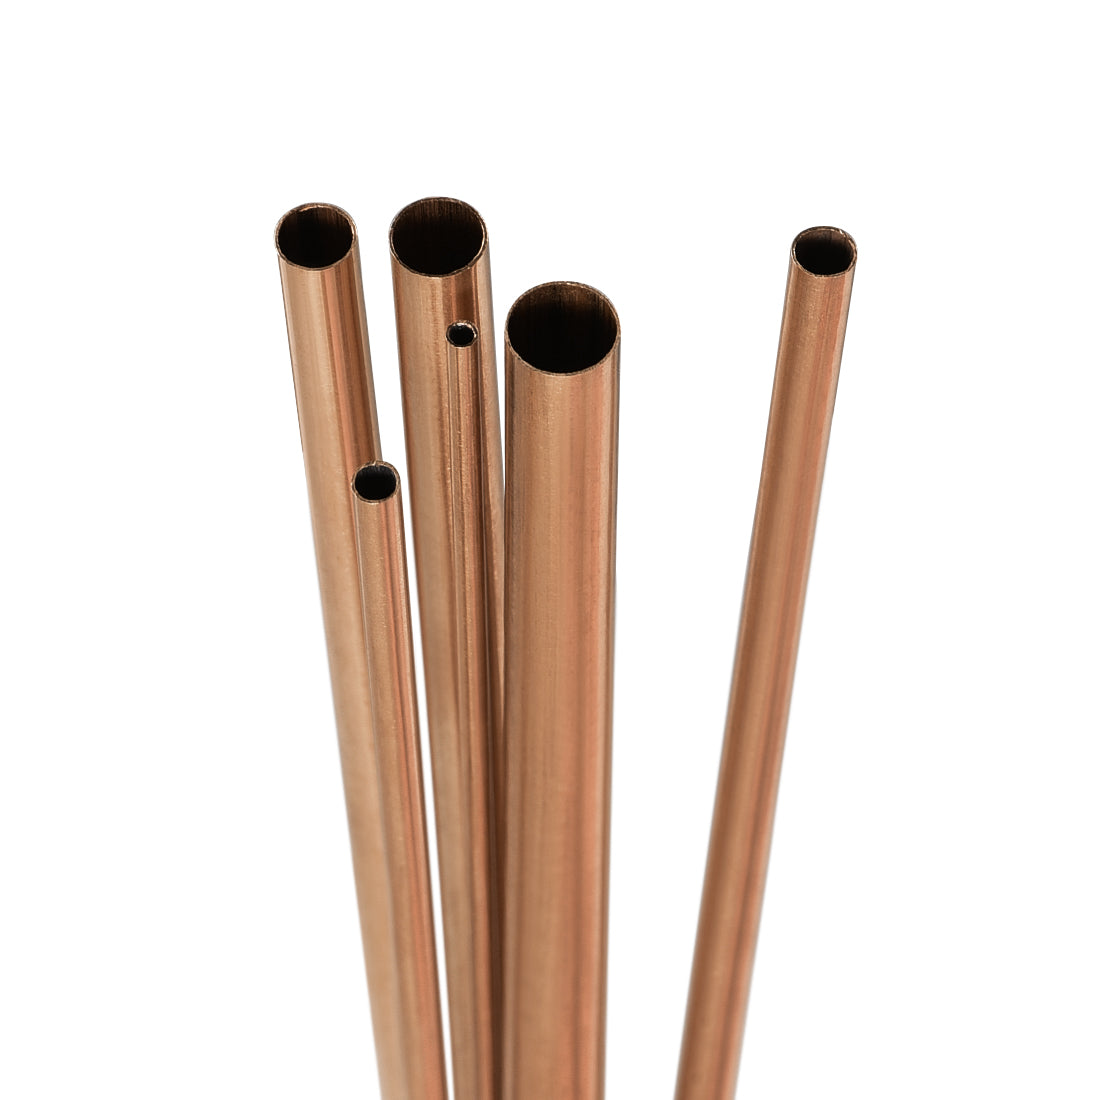 Uxcell Uxcell Copper Tube, 2mm 3mm 4mm 5mm 6mm 7mm OD x 0.5mm Wall Thickness 300mm Length Seamless Round Pipe Tubing, Pack of 6